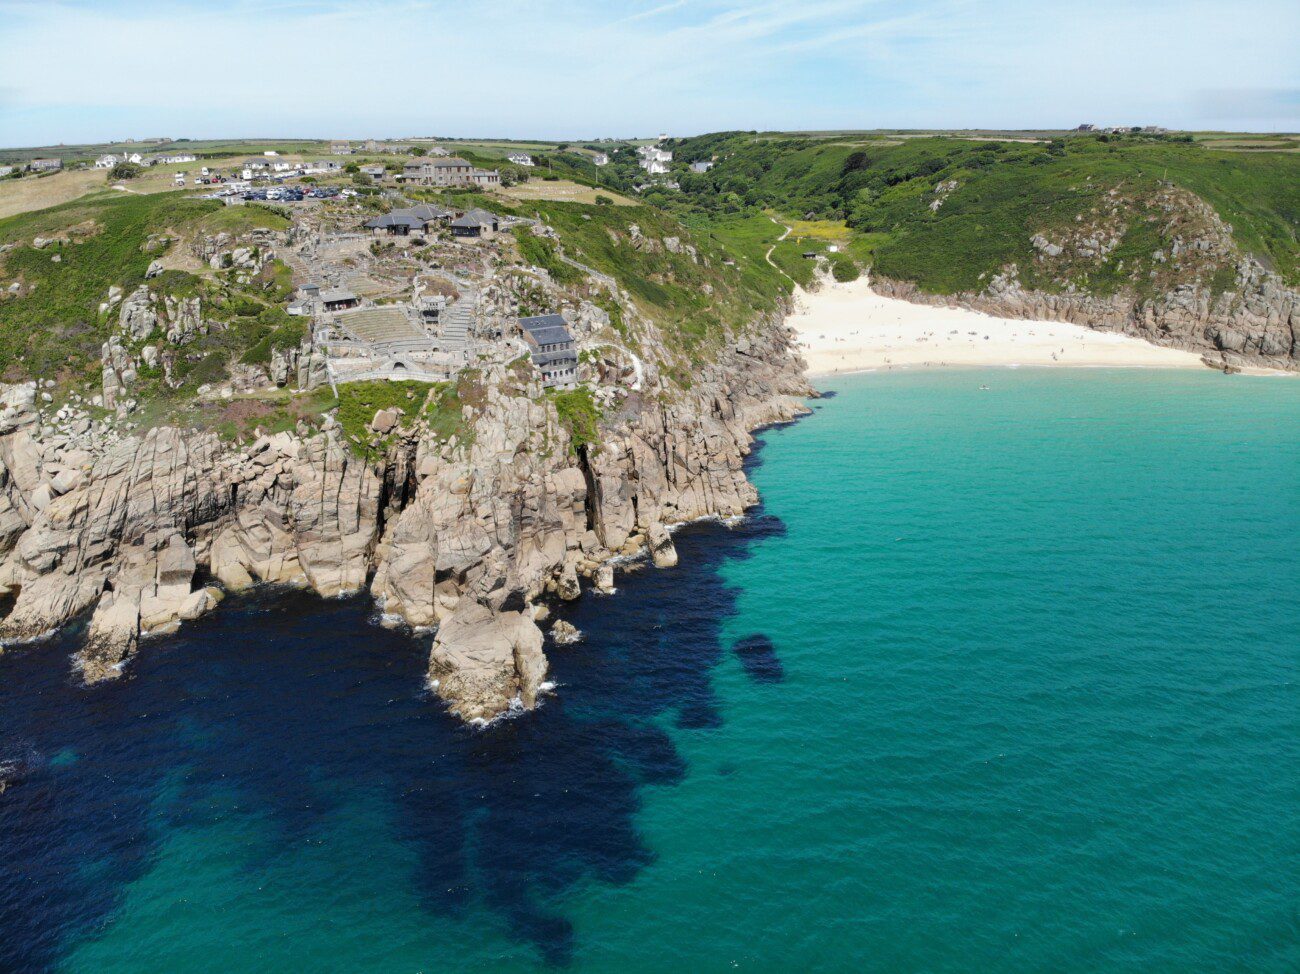 A UK Staycation During the Pandemic: 8 Things You Can Do Safely in Cornwall